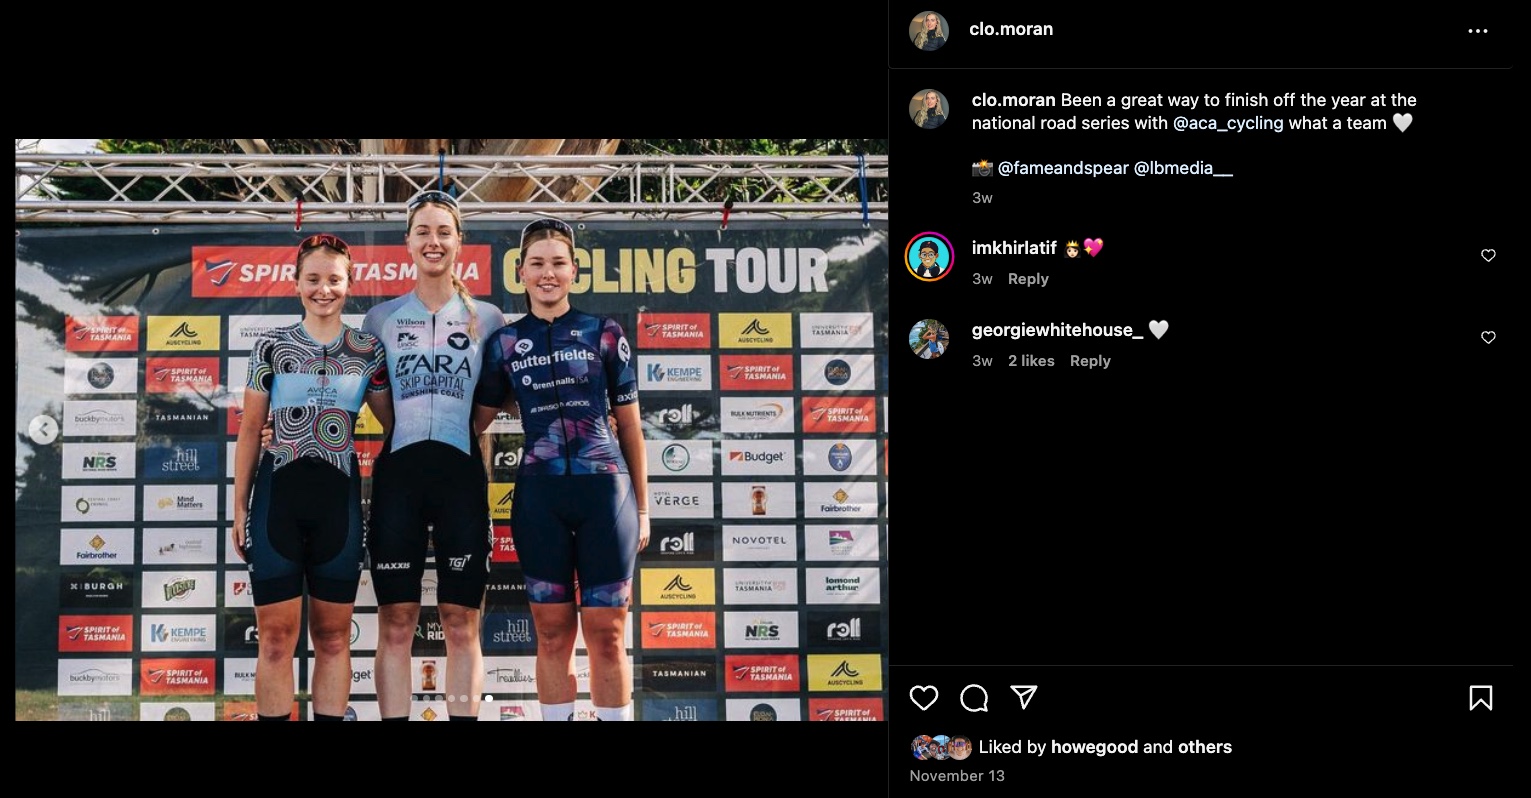 A screengrab of an Instagram post showing Chloe Moran on the podium after a stage of the Tour of Tasmania.